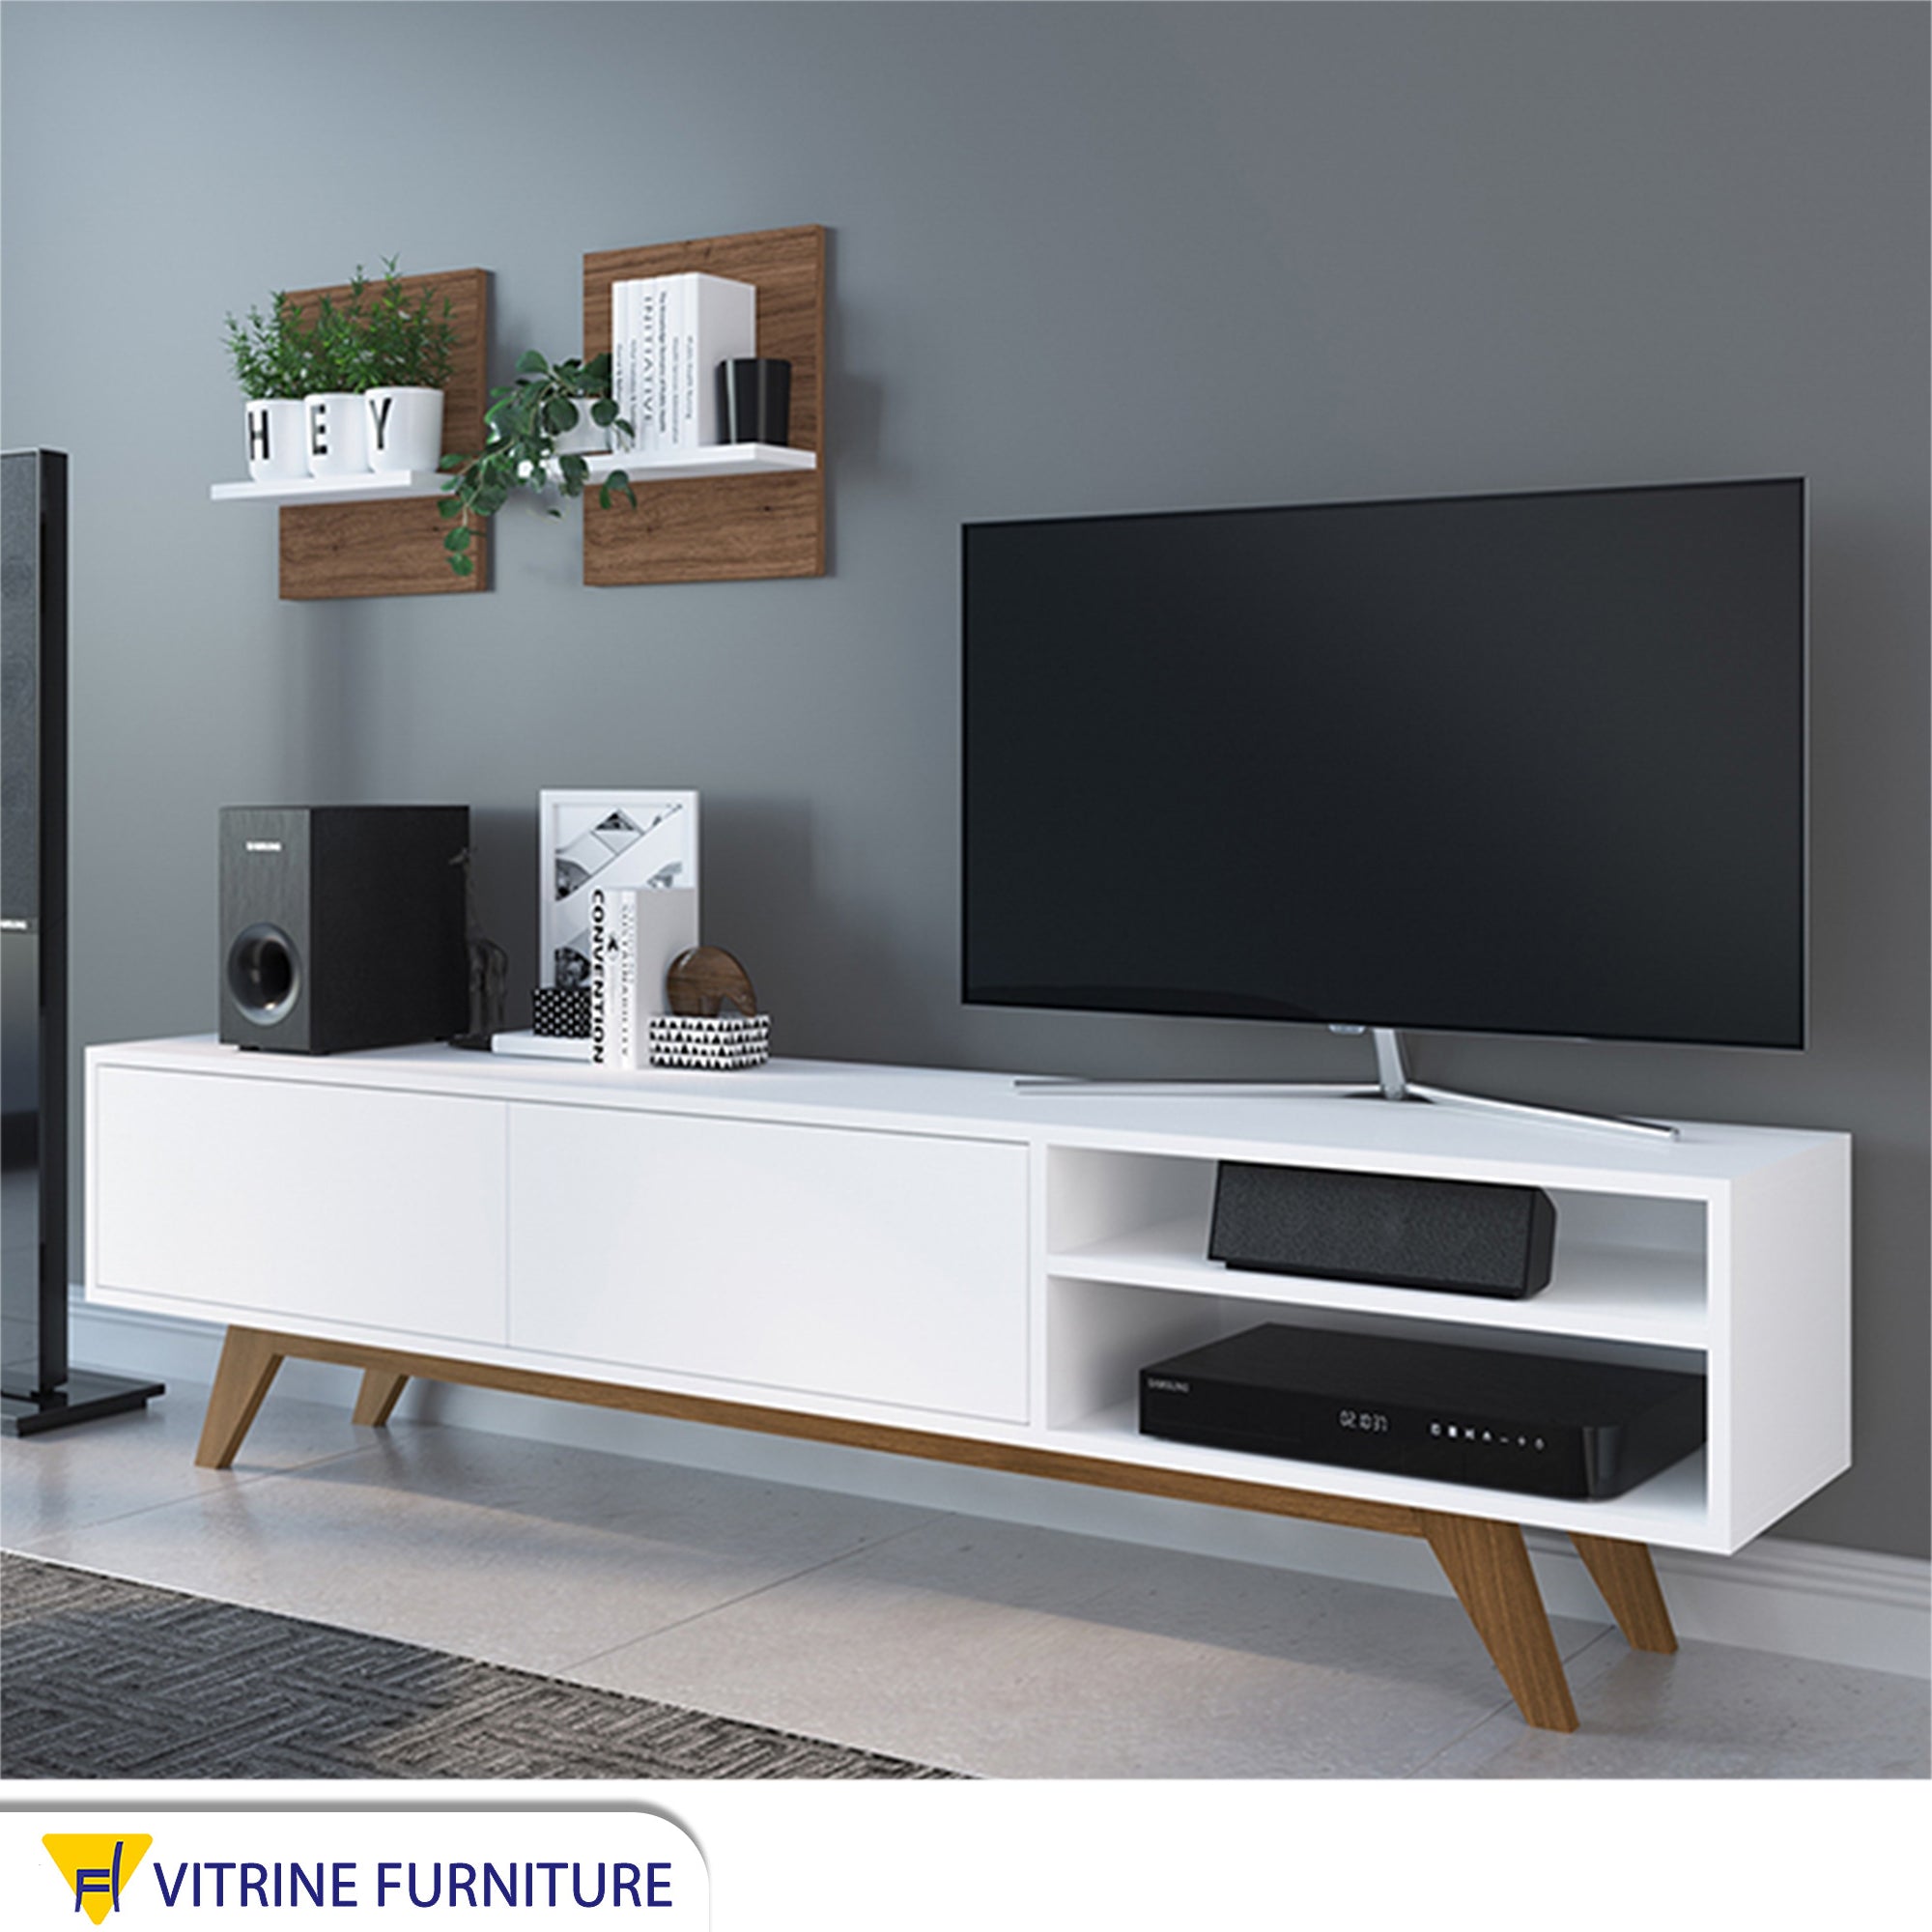 White TV table with high brown legs